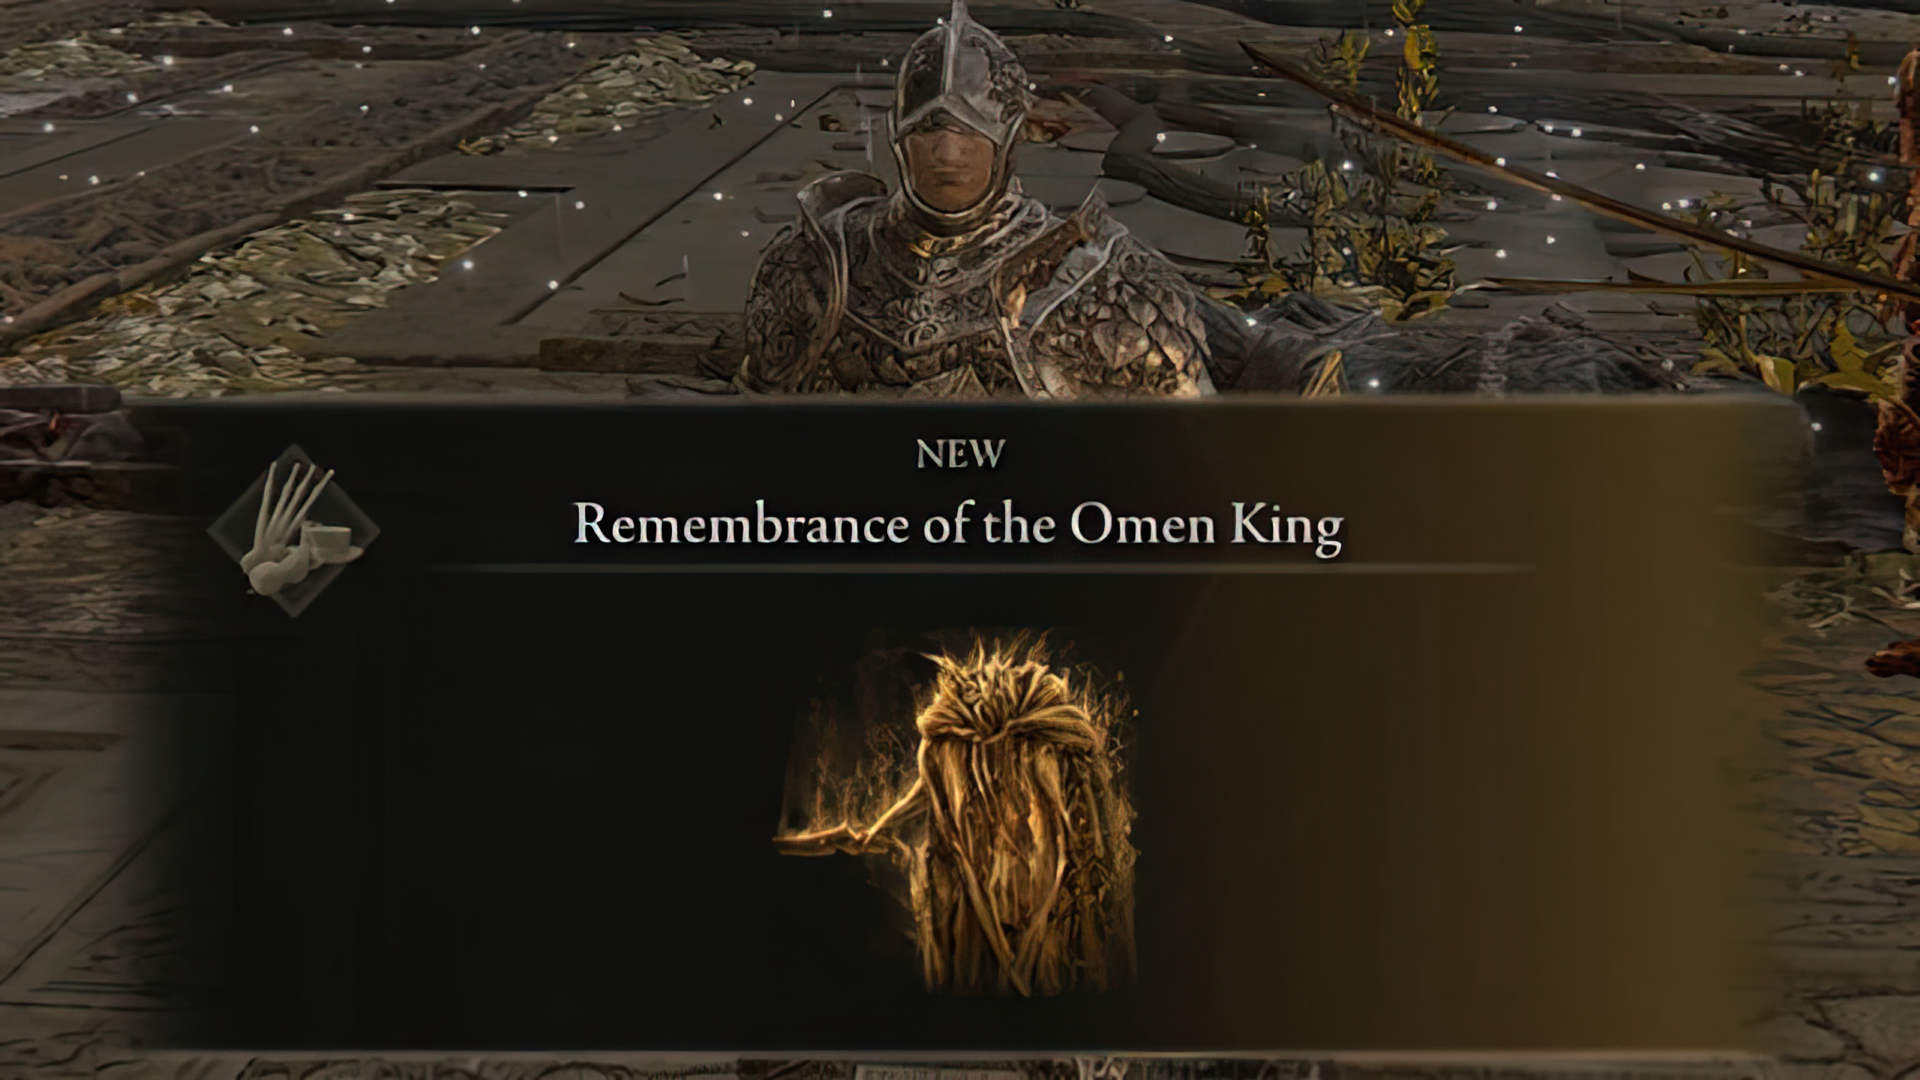 elden ring cant duplicate remembrance